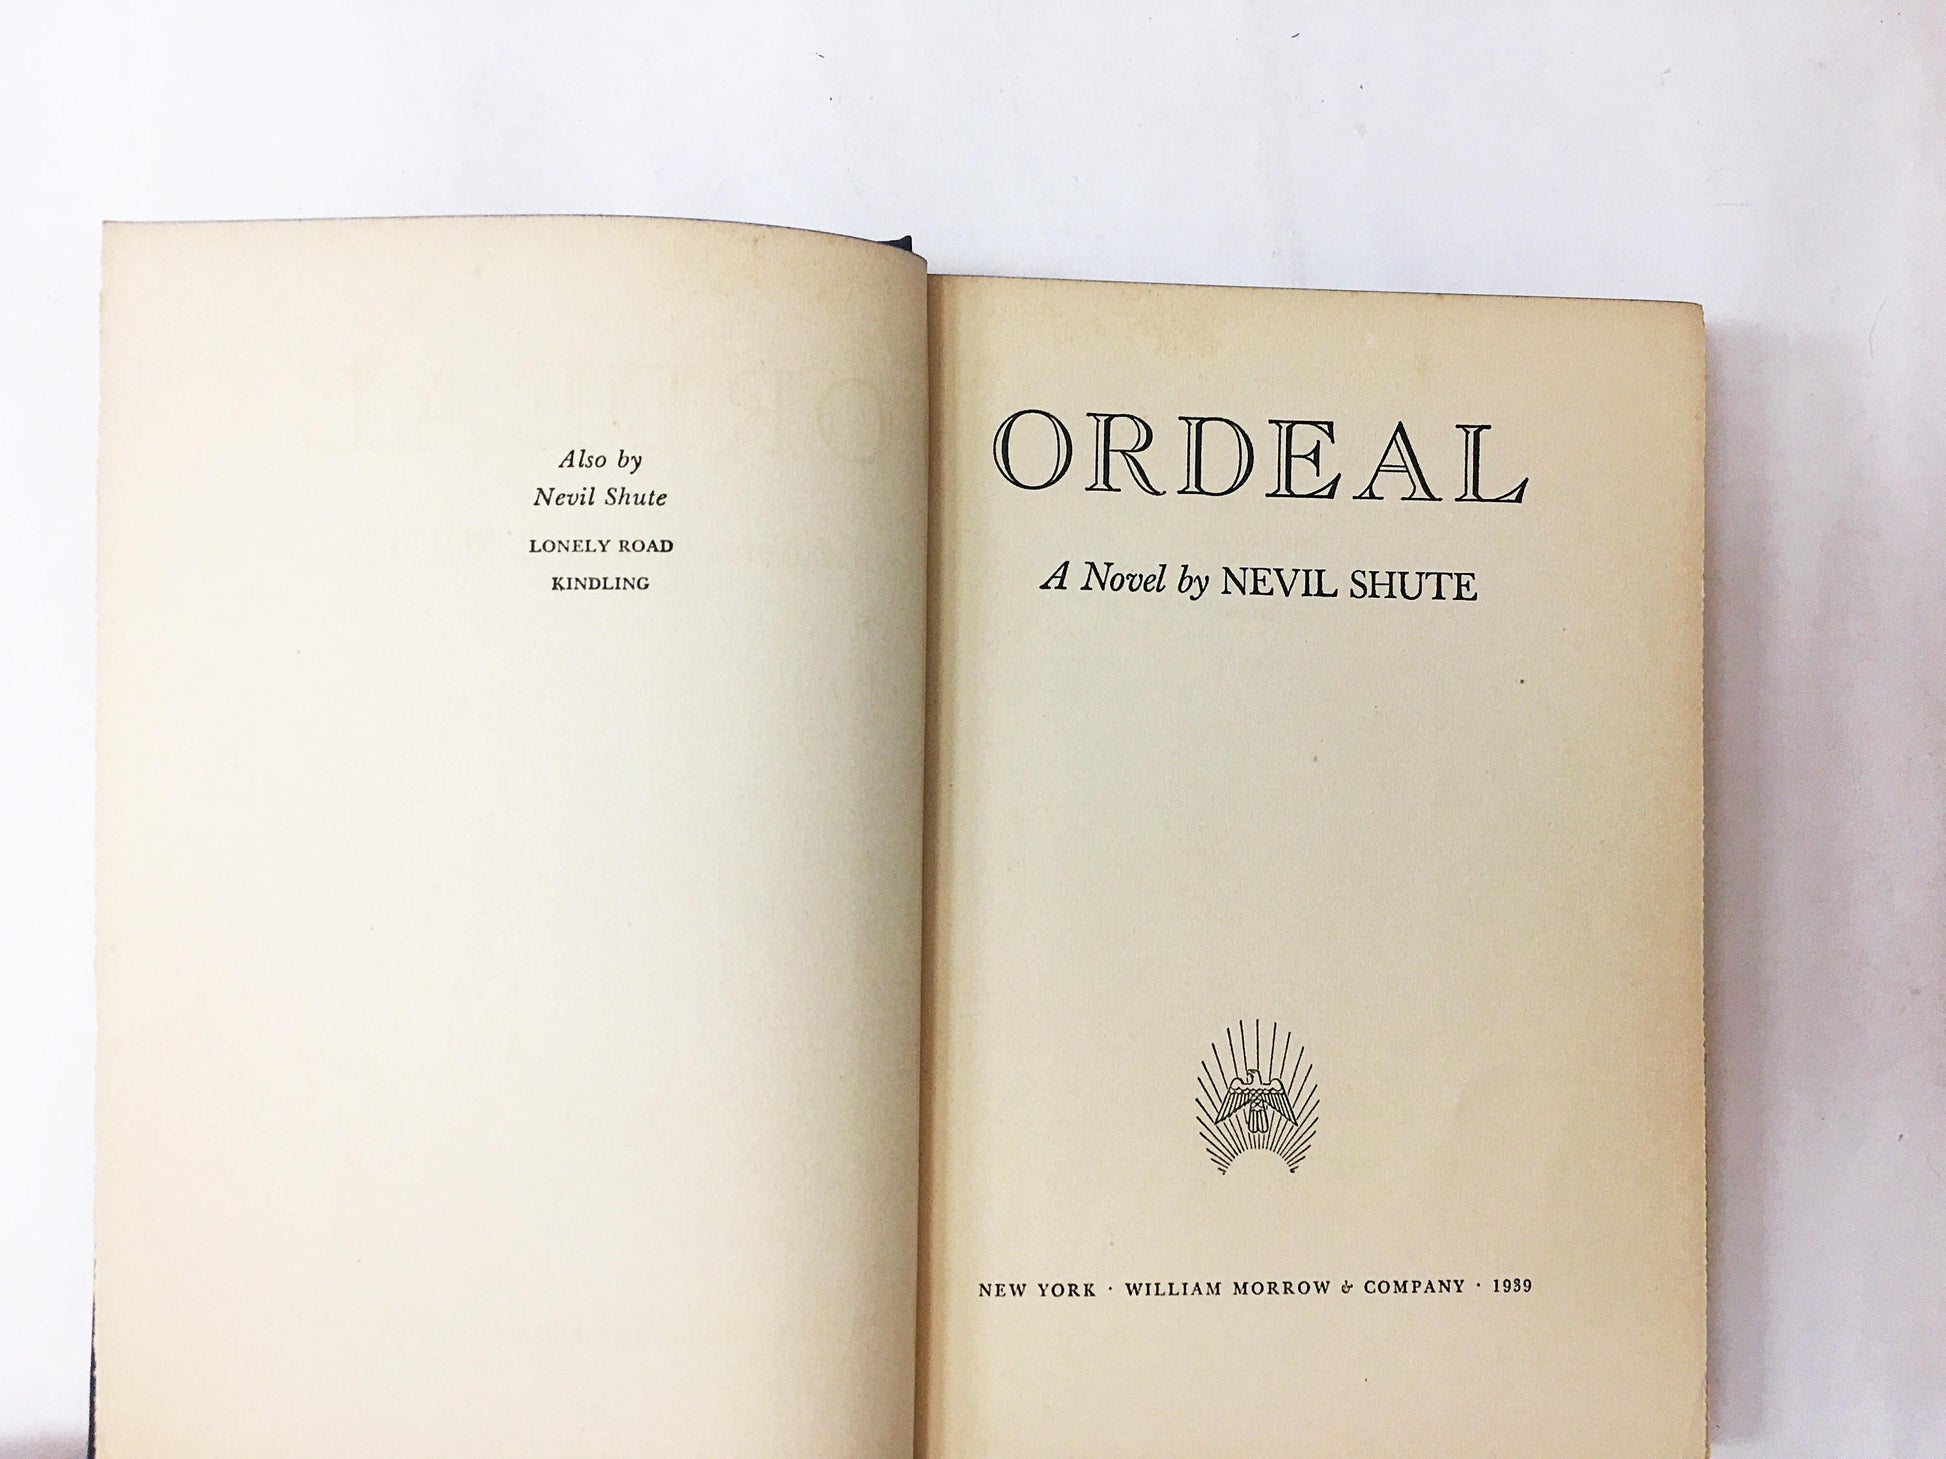 Ordeal by Nevil Shute FIRST EDITION vintage book circa 1939 Blue cloth covered boards Bombs and the world's new kind of war. Military